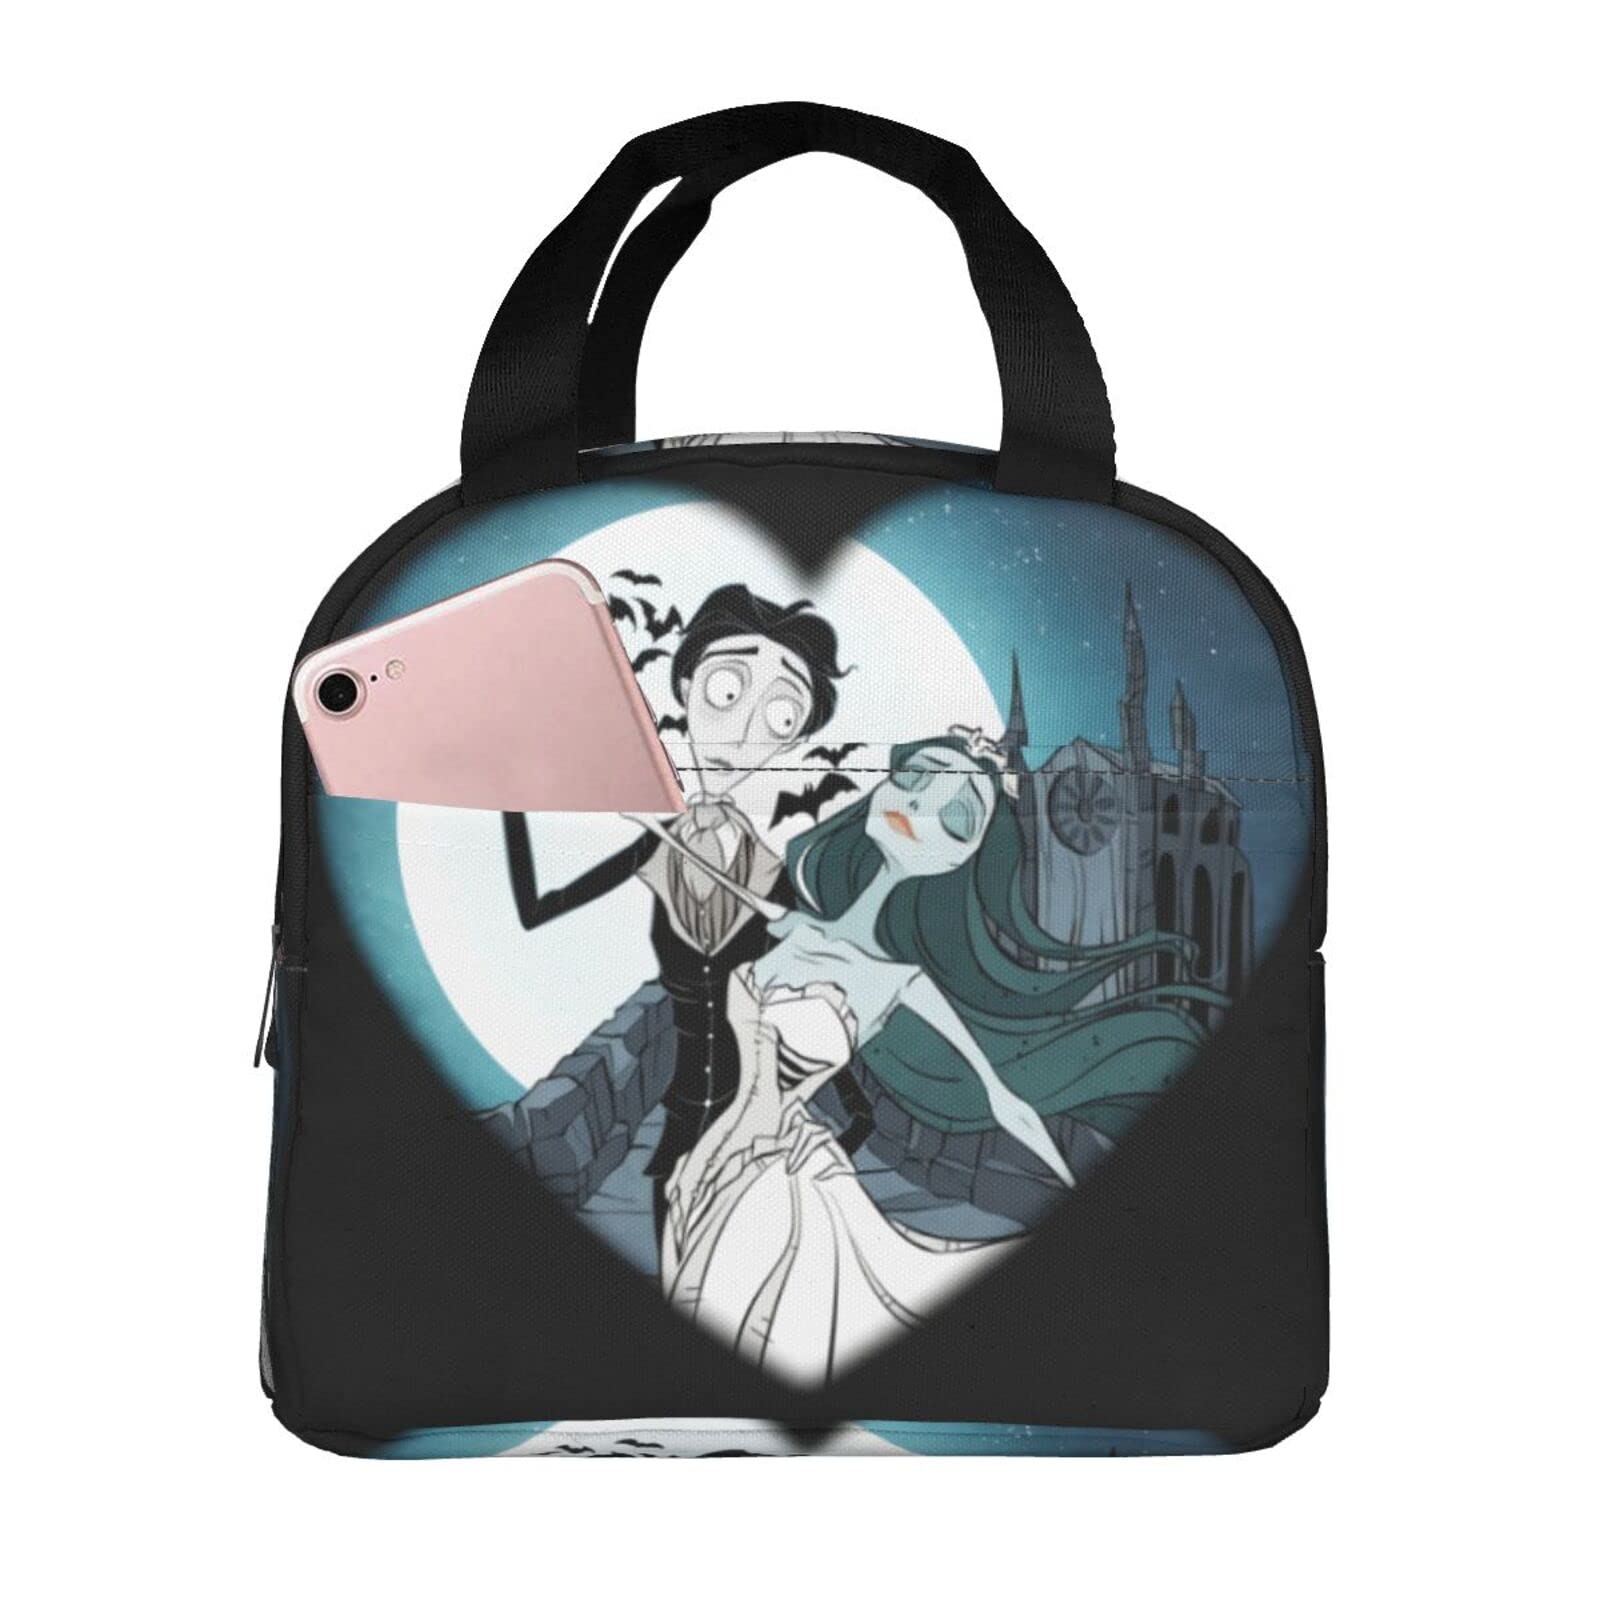 Corpse Bride Lunch Box Travel Bag Reusable Insulated Lunch Bags Picnic Tote Bag